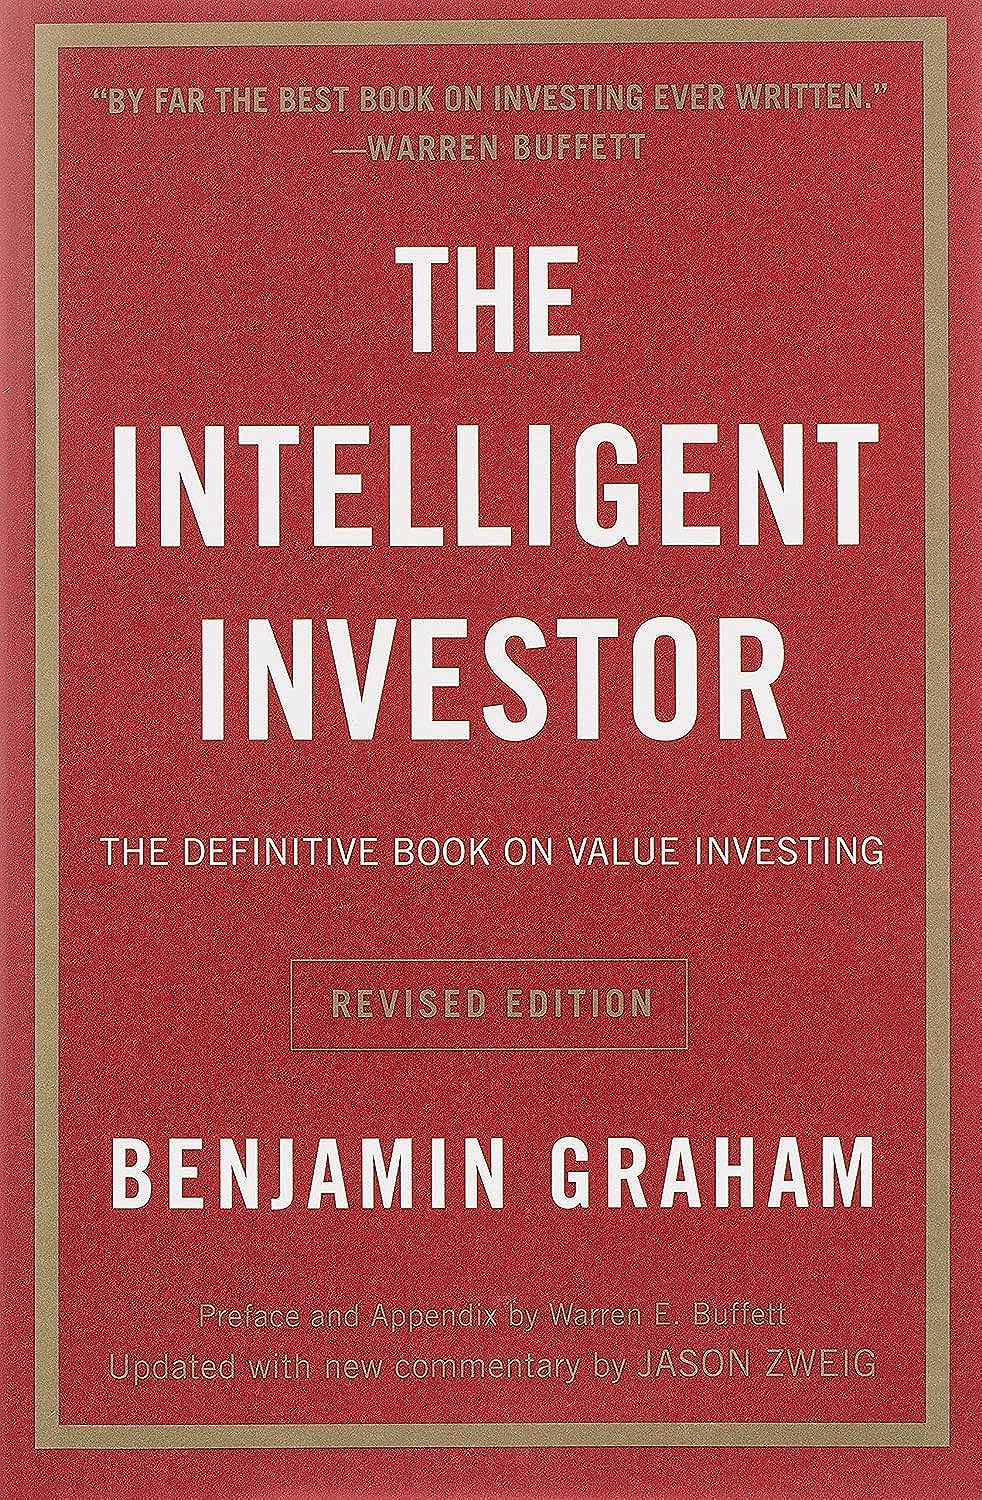 best trading books of all time | The Intelligent Investor Rev Ed.: The Definitive Book on Value Investing, by Benjamin Graham (Author), Jason Zweig (Author), Warren E. Buffett (Collaborator)